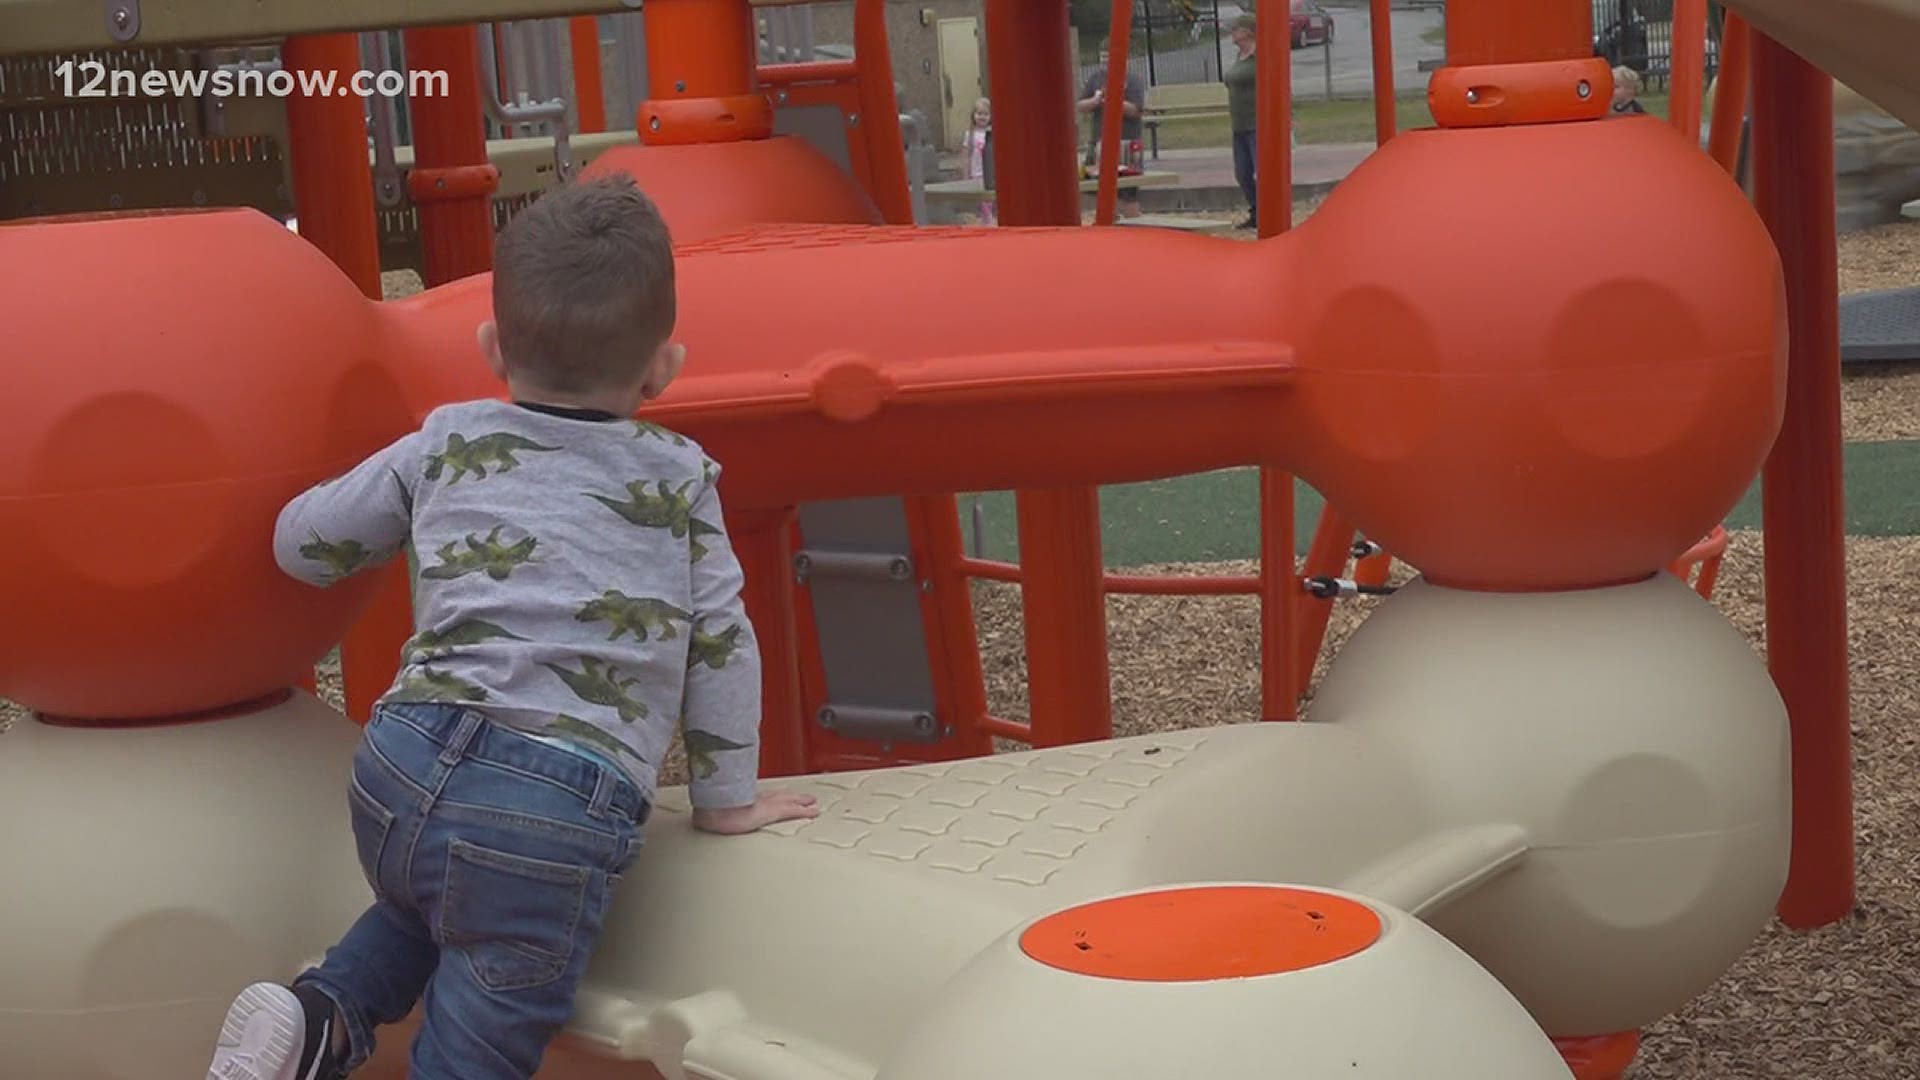 A year ago, the park was shut down after an engineer found the playground was unsafe.